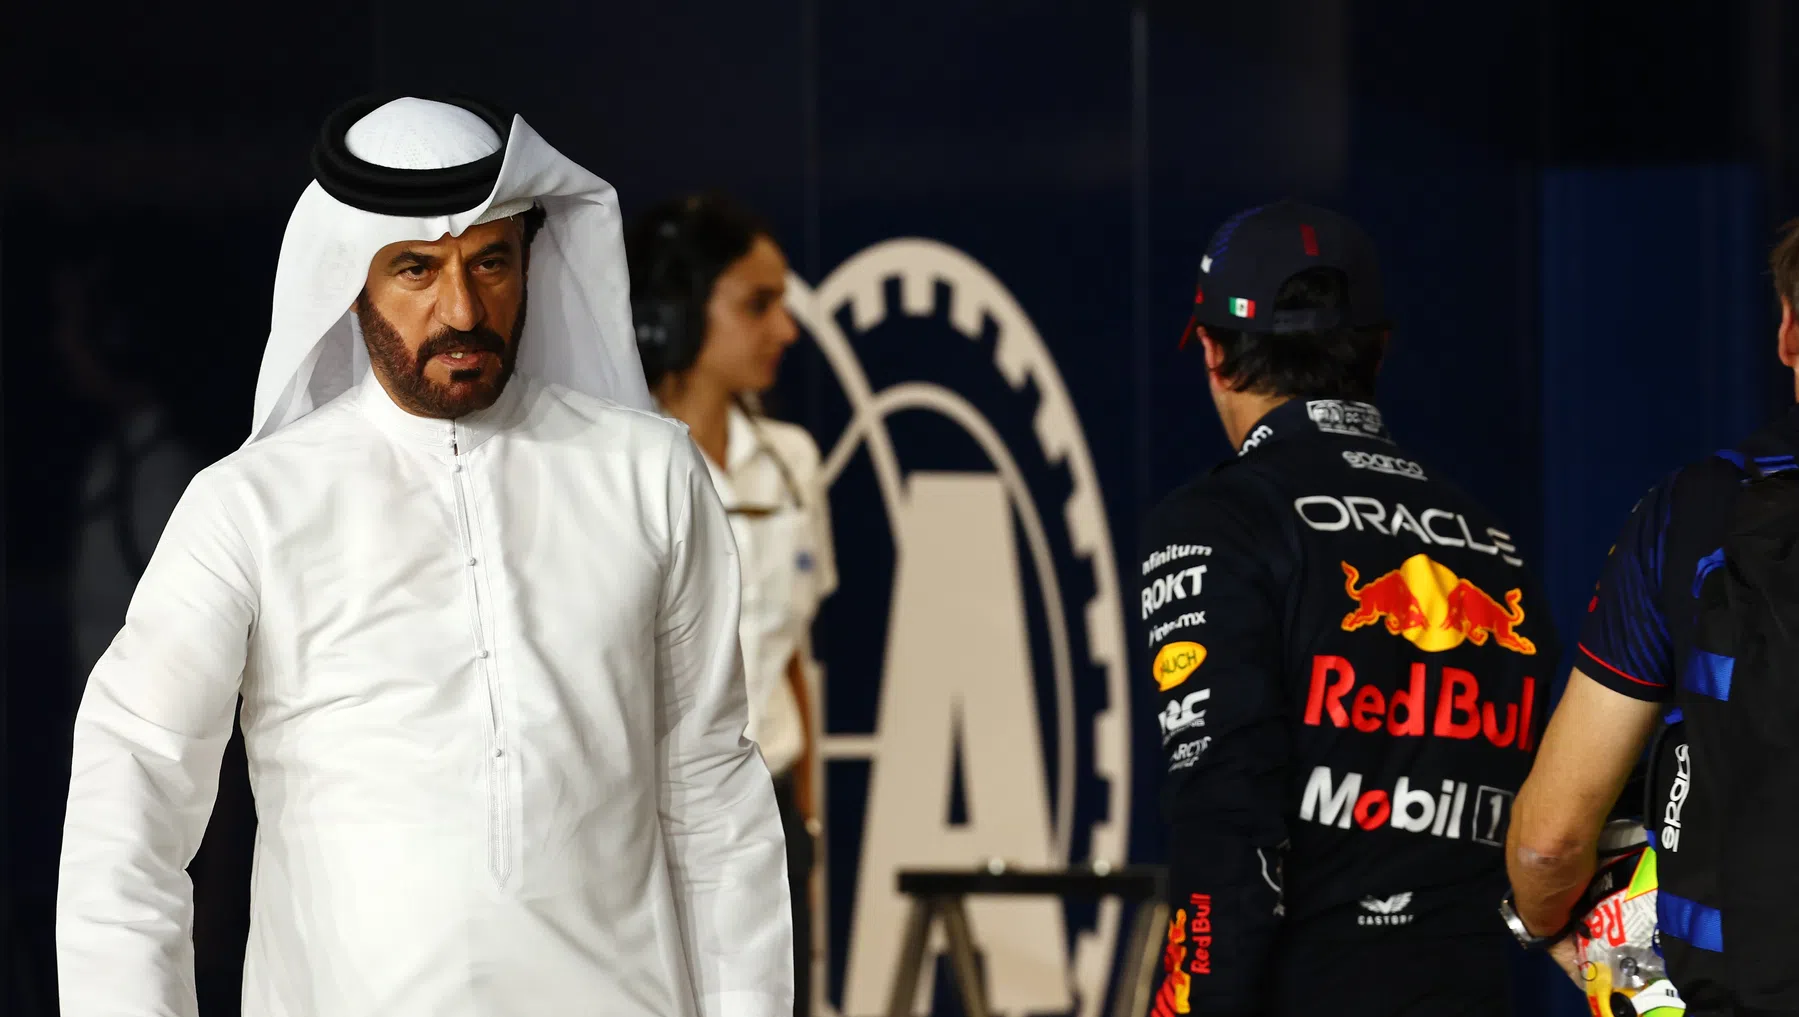 fia president mohammed ben sulayem wil andretti cadillac als elfde f1 team